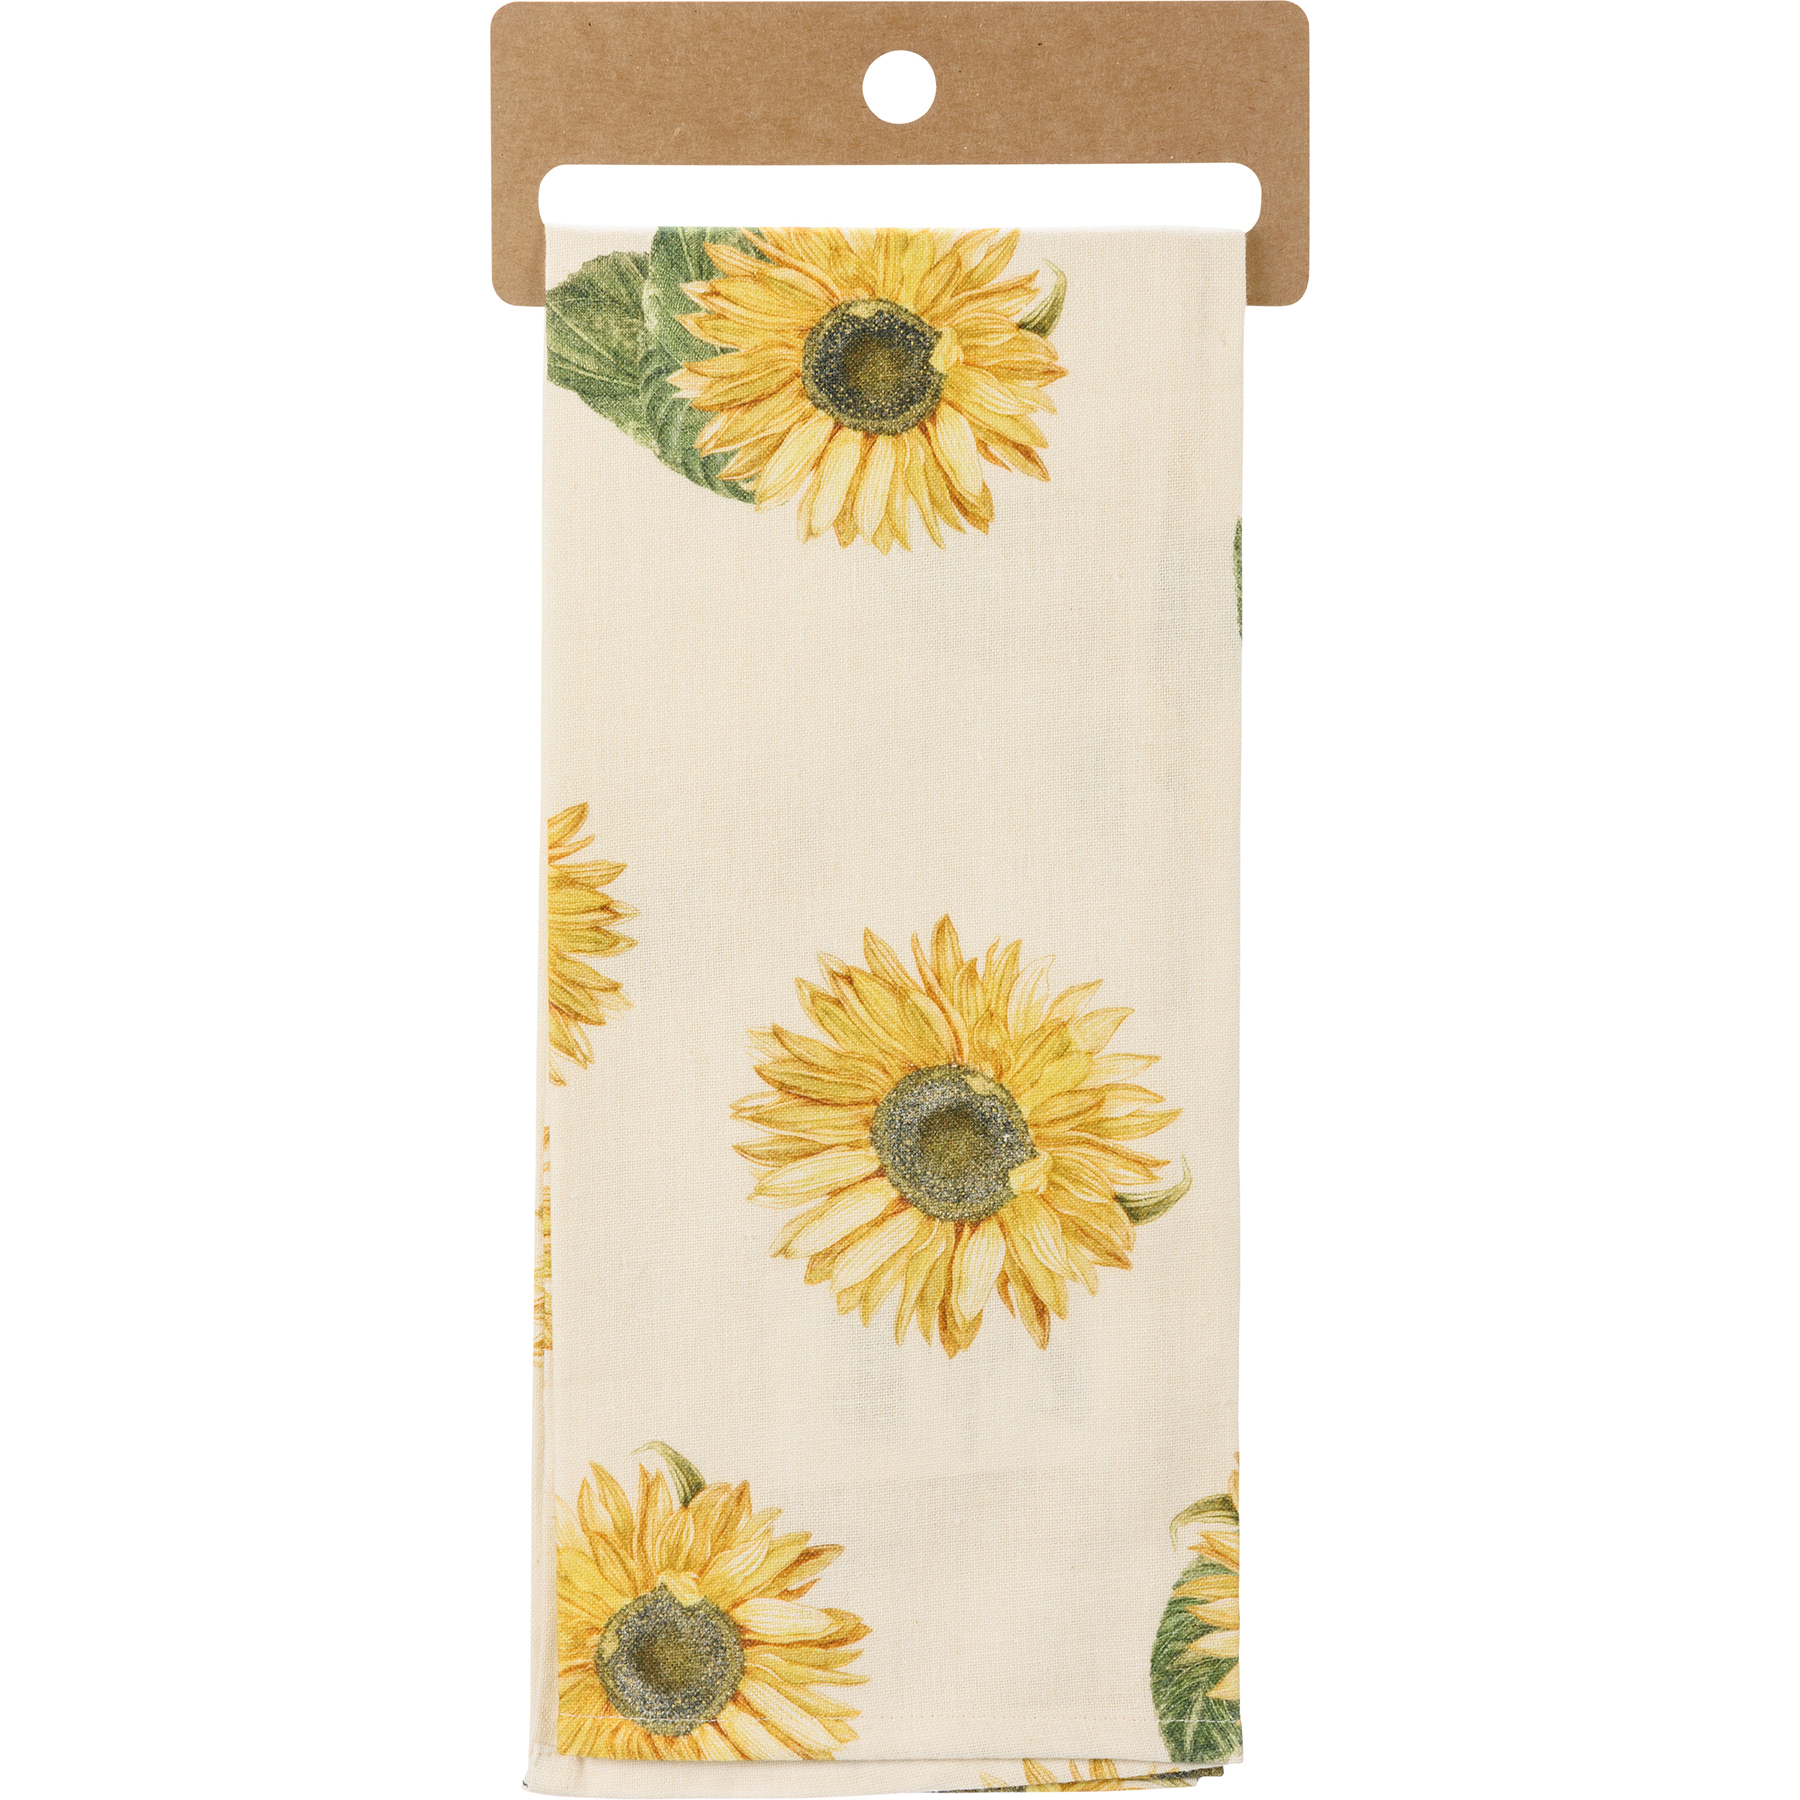 Home Decoration Metal Sunflower Paper Towel Holder Sunflower Kitchen Decor  - Buy Home Decoration Metal Sunflower Paper Towel Holder Sunflower Kitchen  Decor Product on